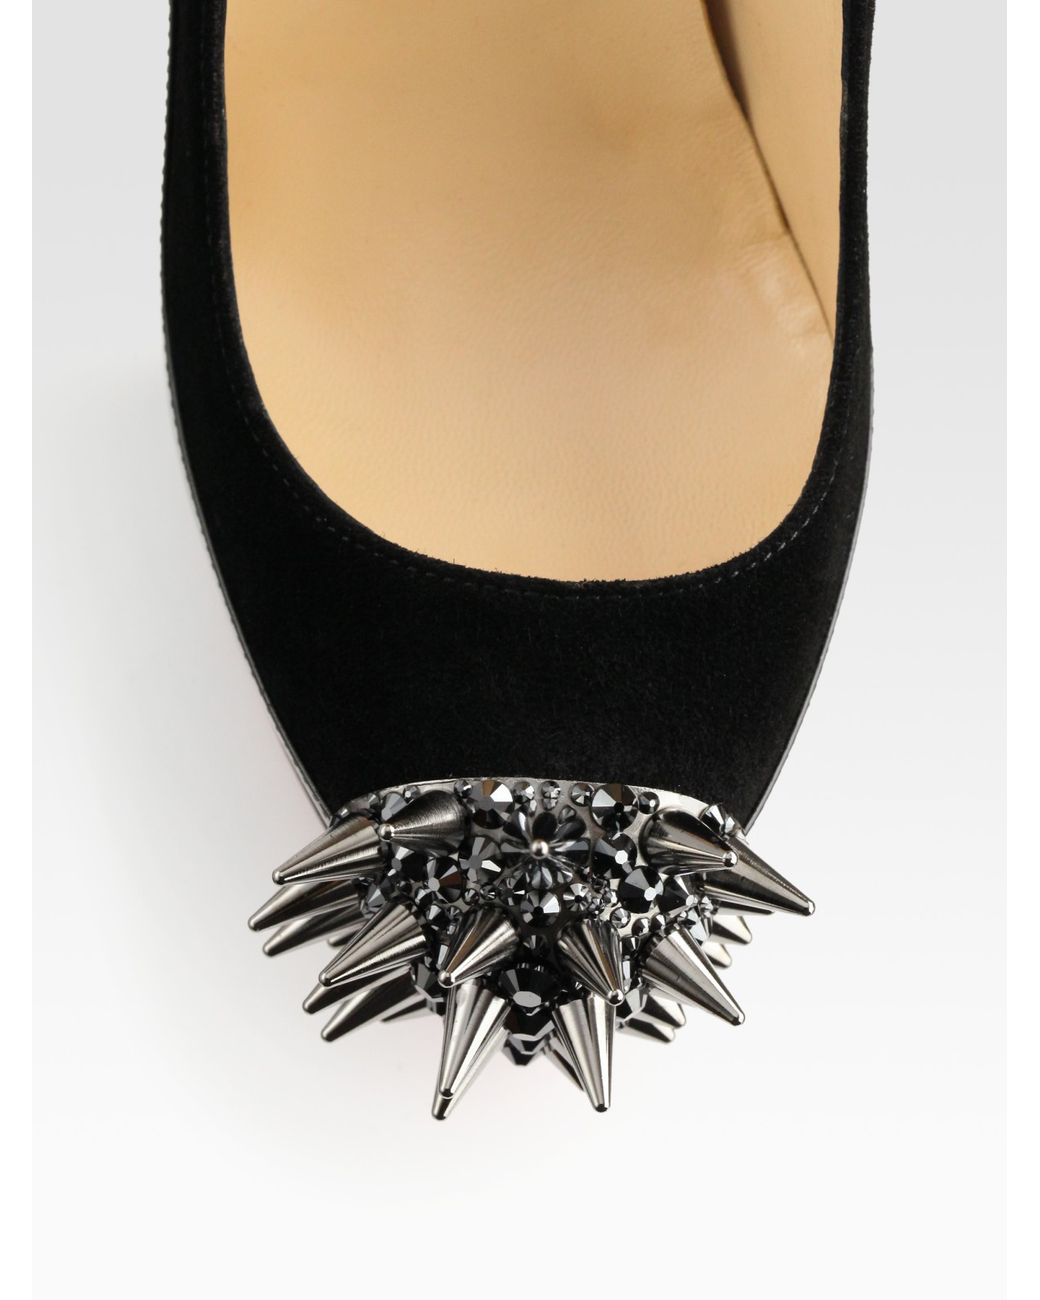 Christian Louboutin Asteroid Suede and Patent Leather Spike Pumps in Black  | Lyst